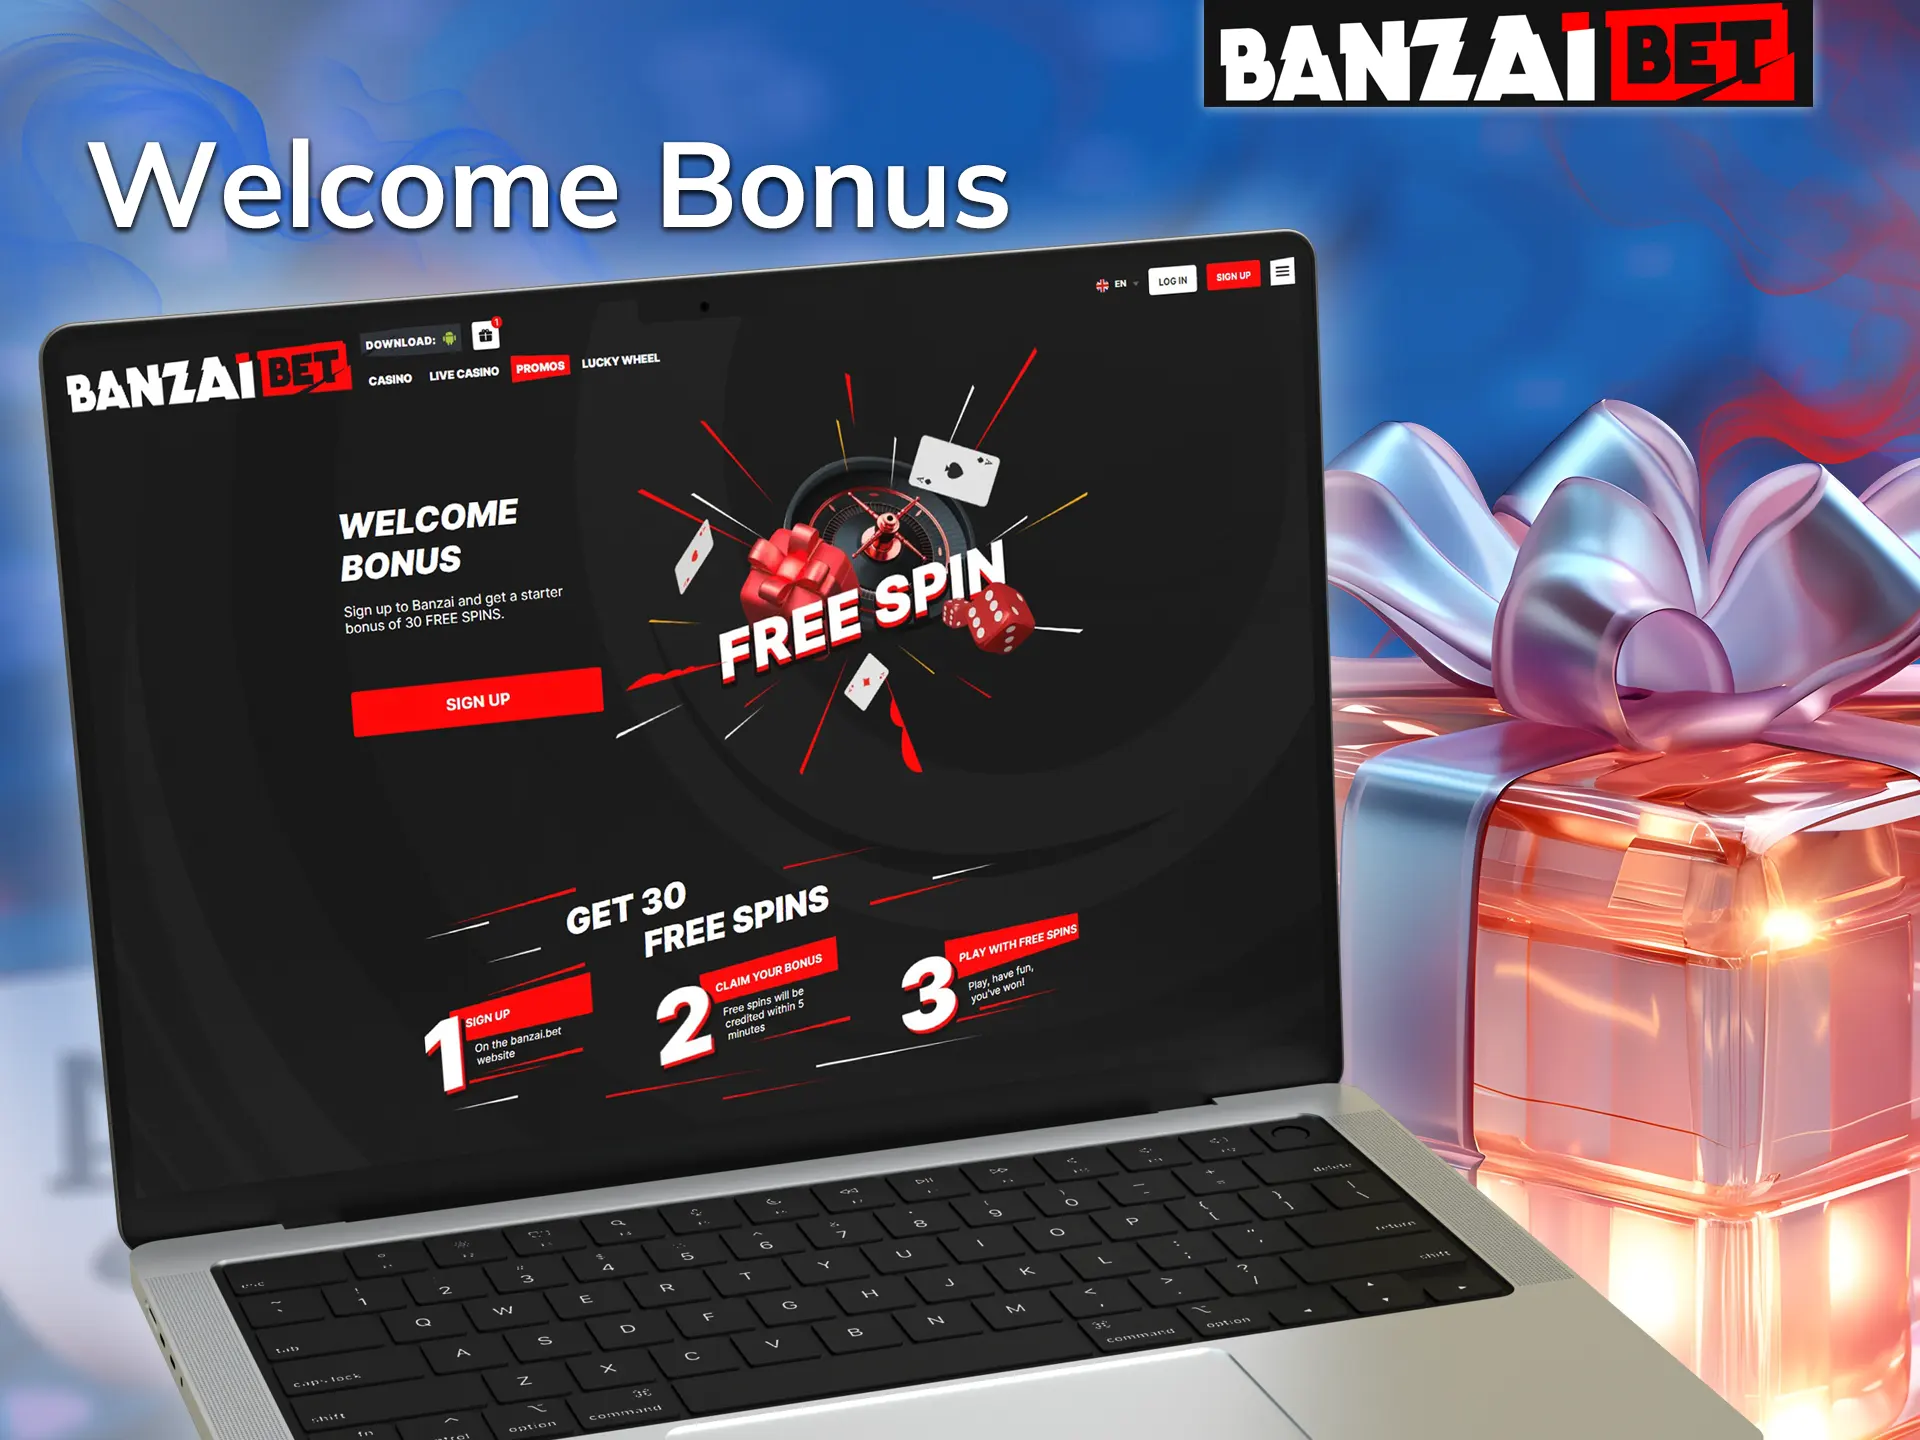 Register an account at Banzai Bet and receive a welcome bonus.